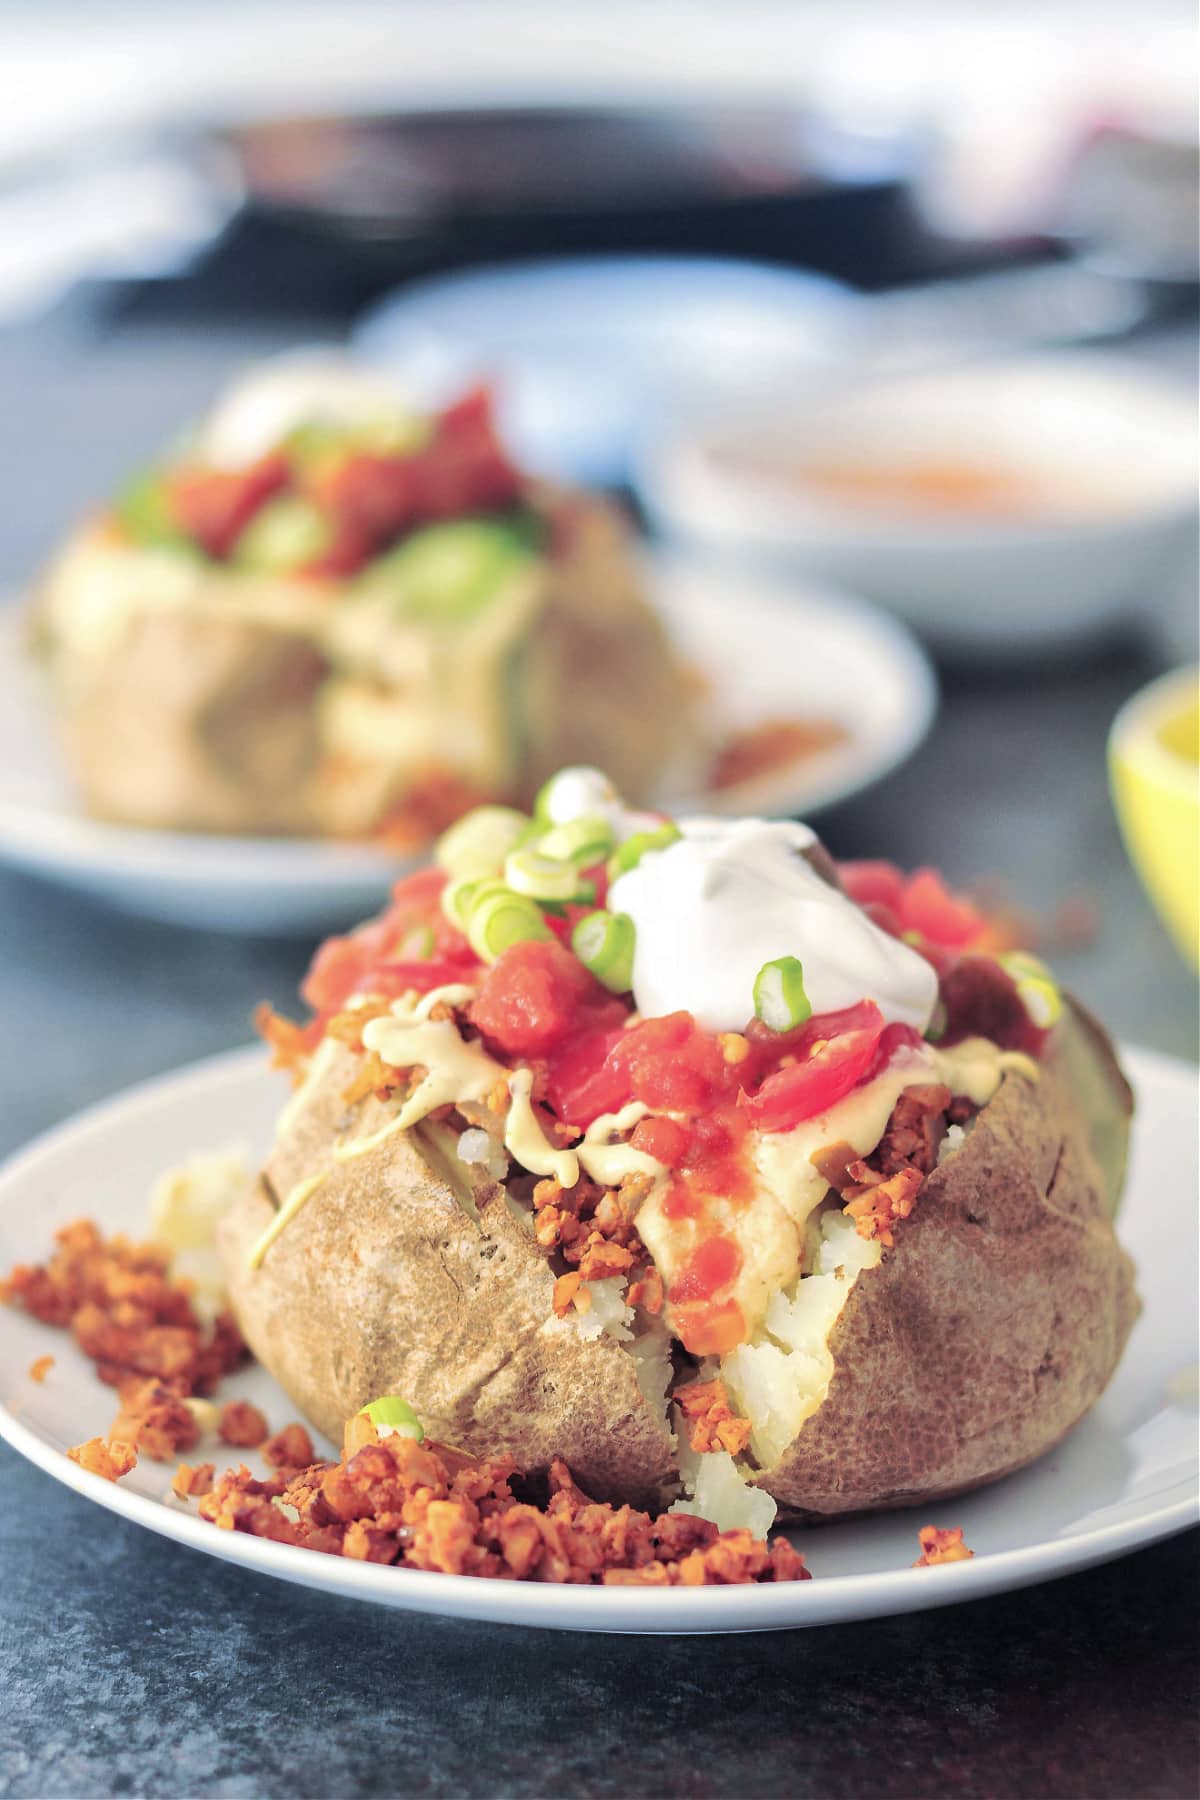 two taco stuffed baked potatoes served on a white plate; potatoes are stuffed with taco meat, cheese sauce, salsa, sliced jalapeños, sour cream and sliced green onion. Small bowls of salsa, cheese sauce, chopped tomatoes and green onions sit on the side.